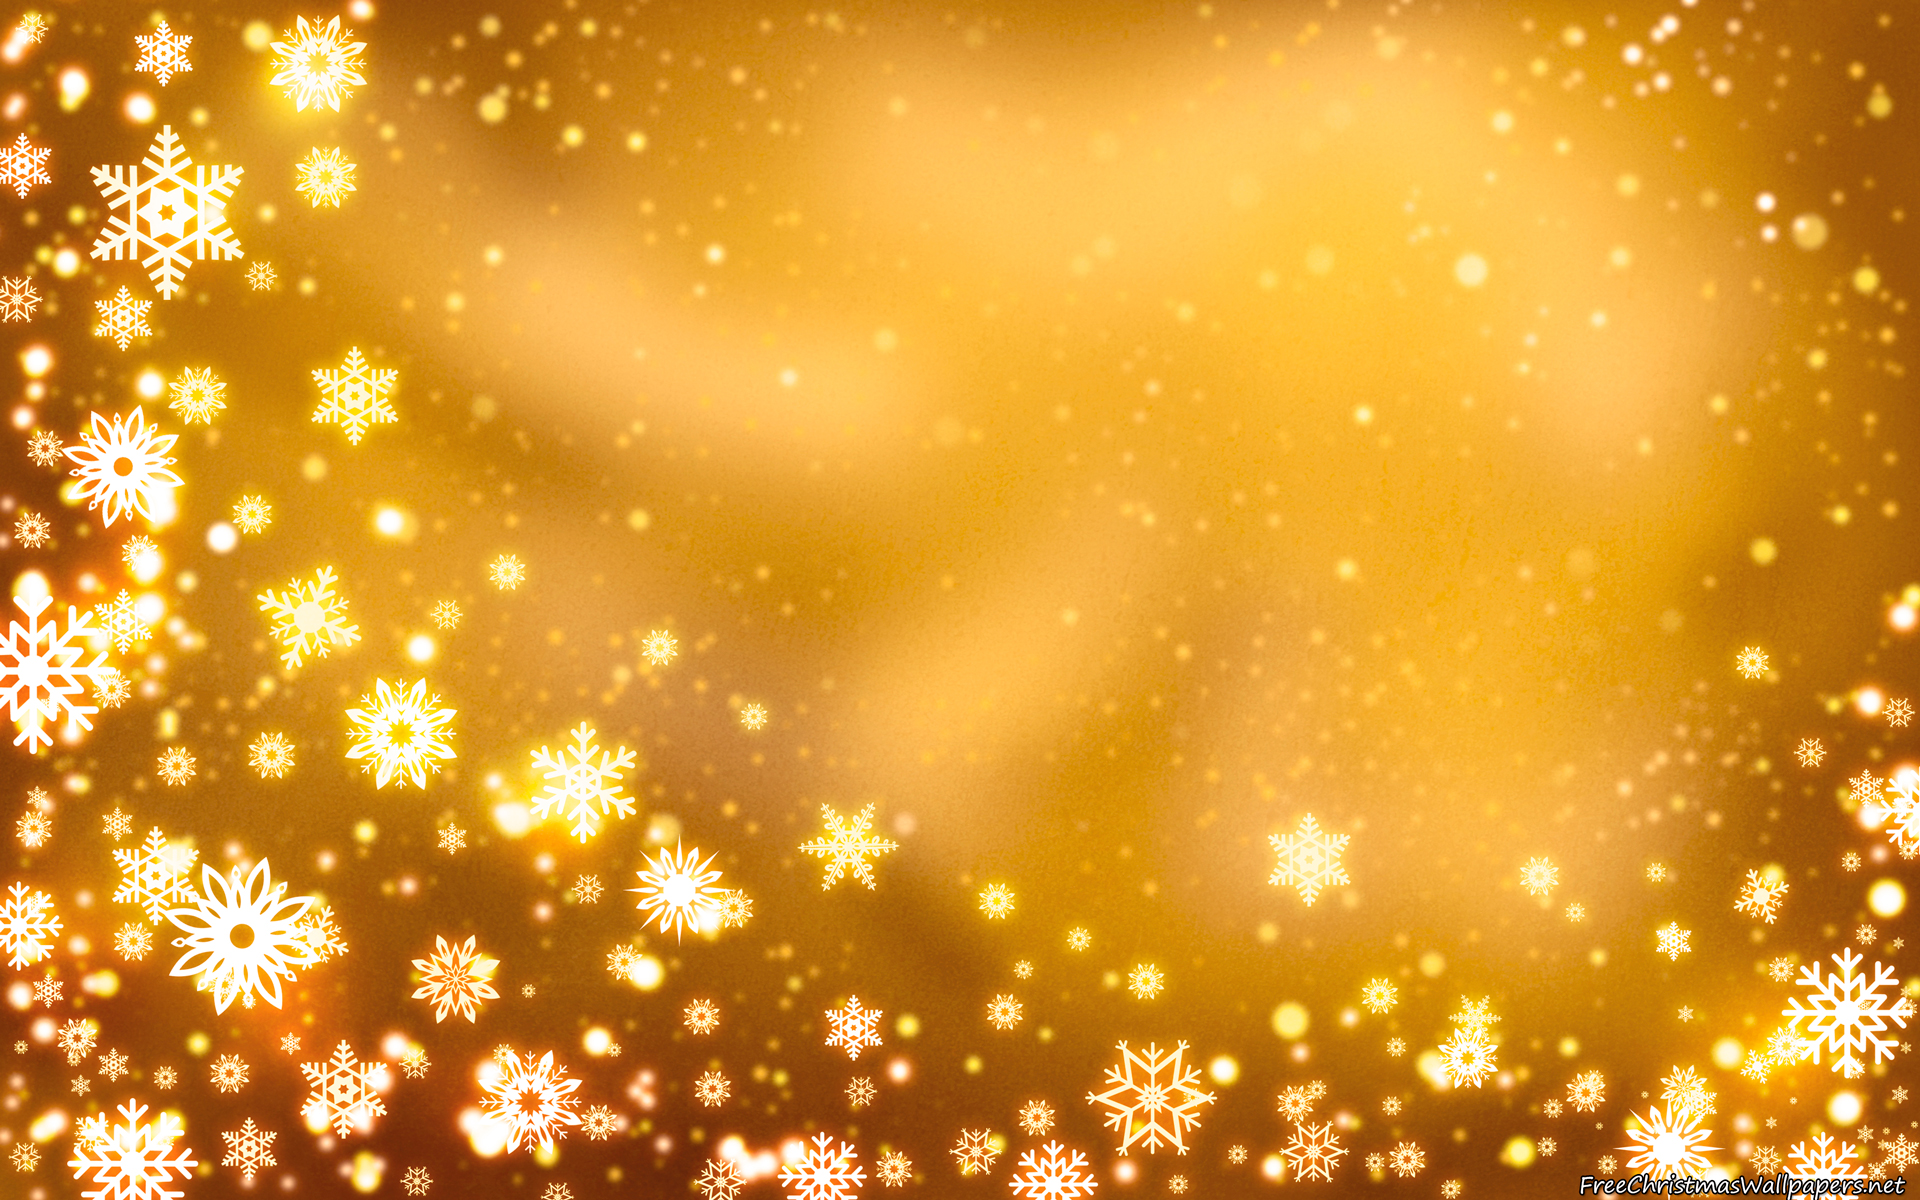 Yellow Christmas Background with Snowflakes Wallpaper